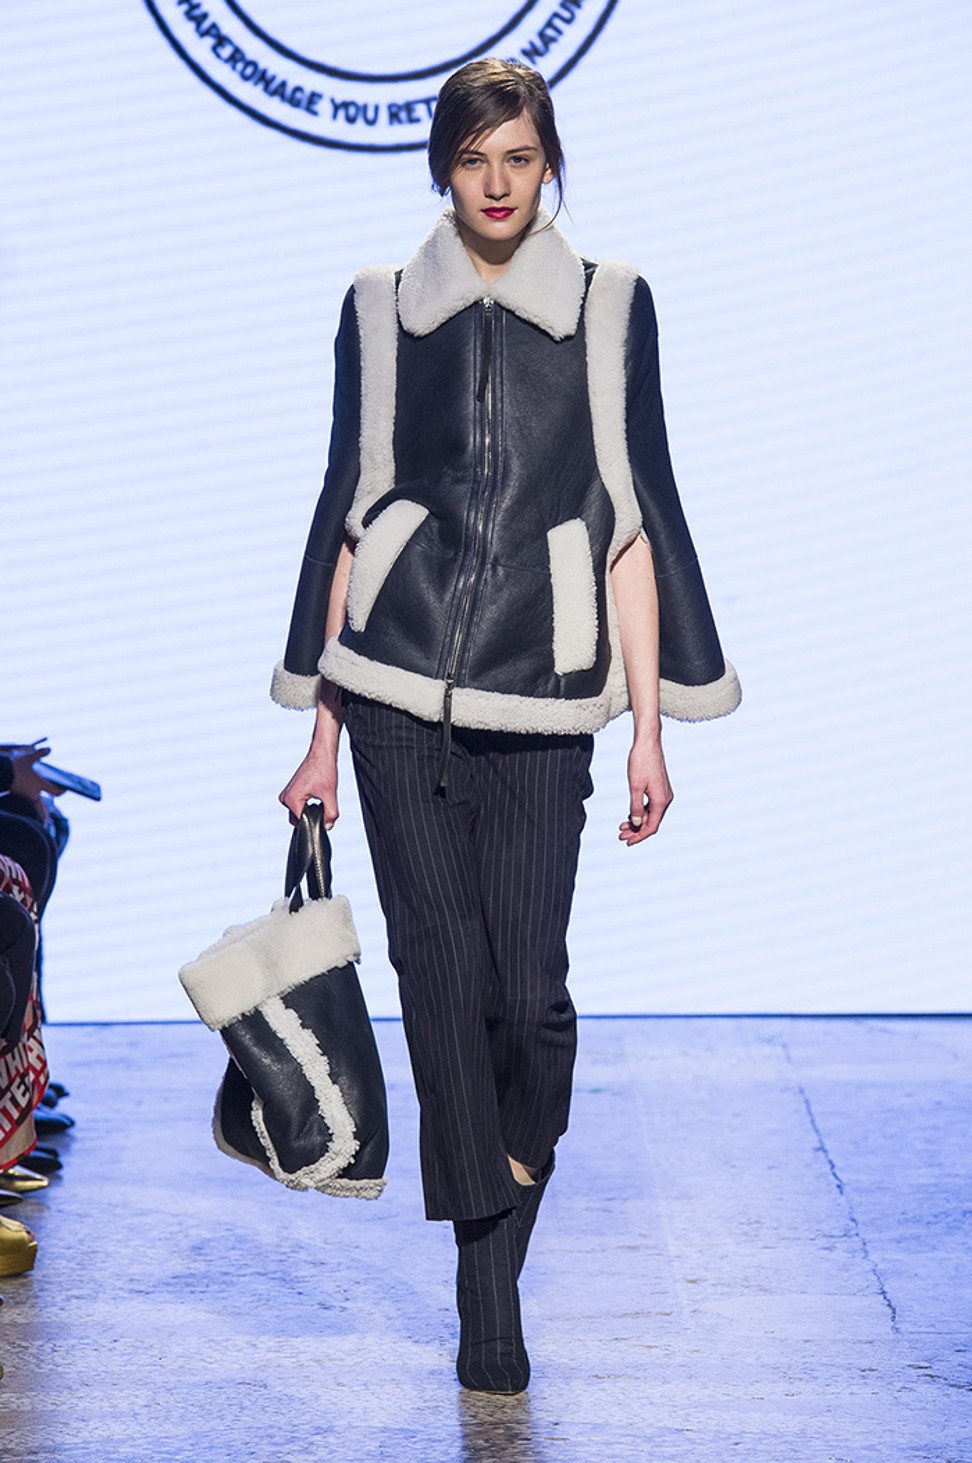 A look from the Fashion Haining show at Milan Fashion Week. Photo: Alessandro Lucioni